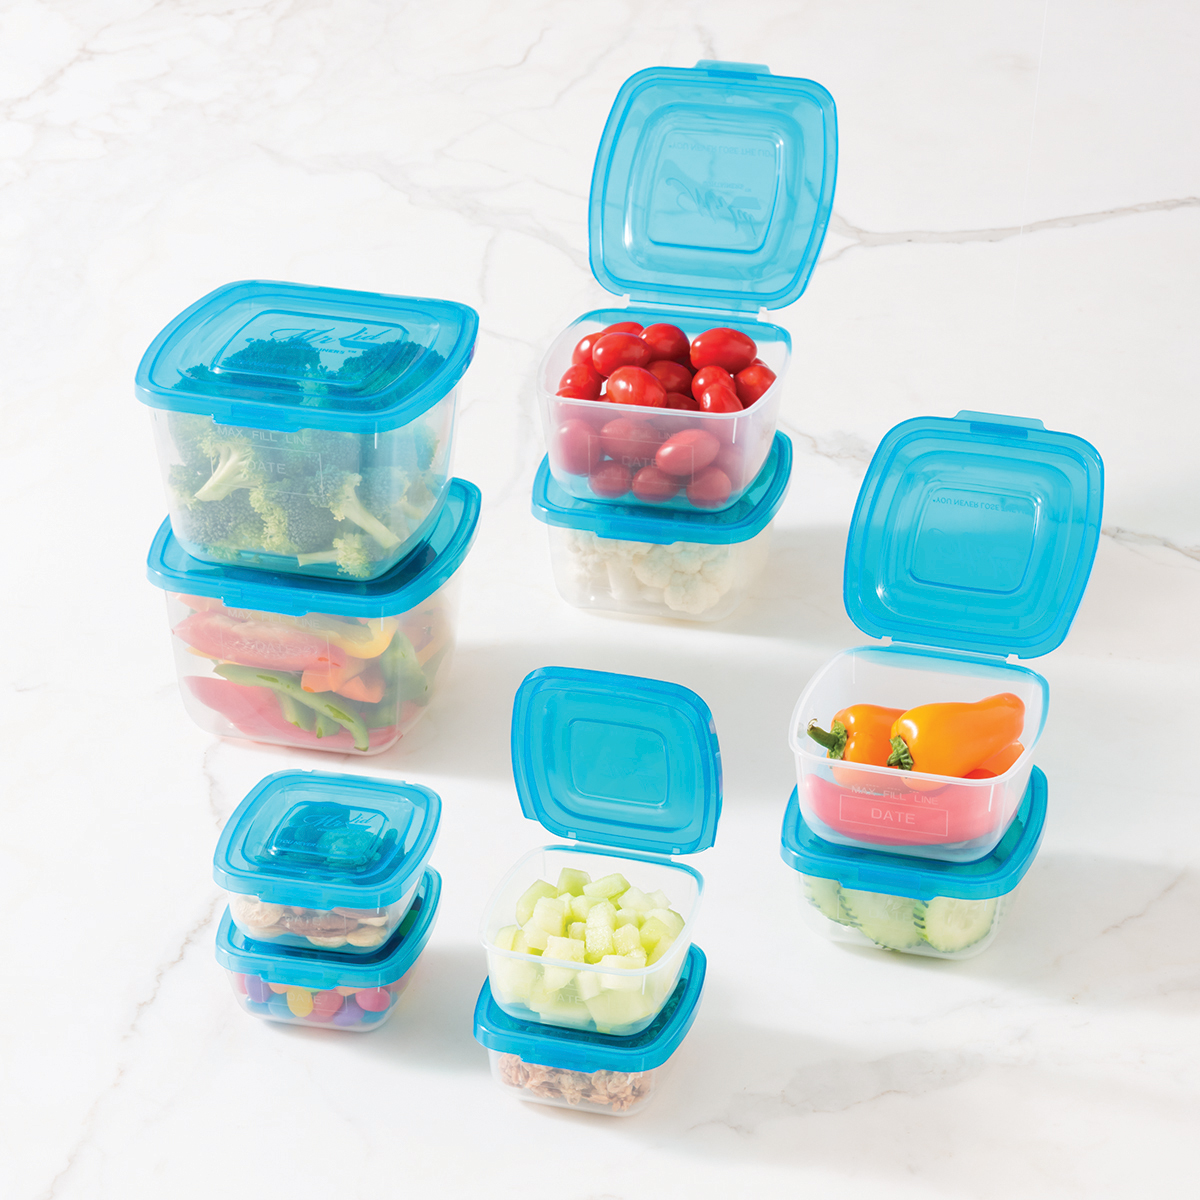 Details about   New 34 Pcs Reusable Plastic Food Storage Containers Set with Air Tight Blue Lids 